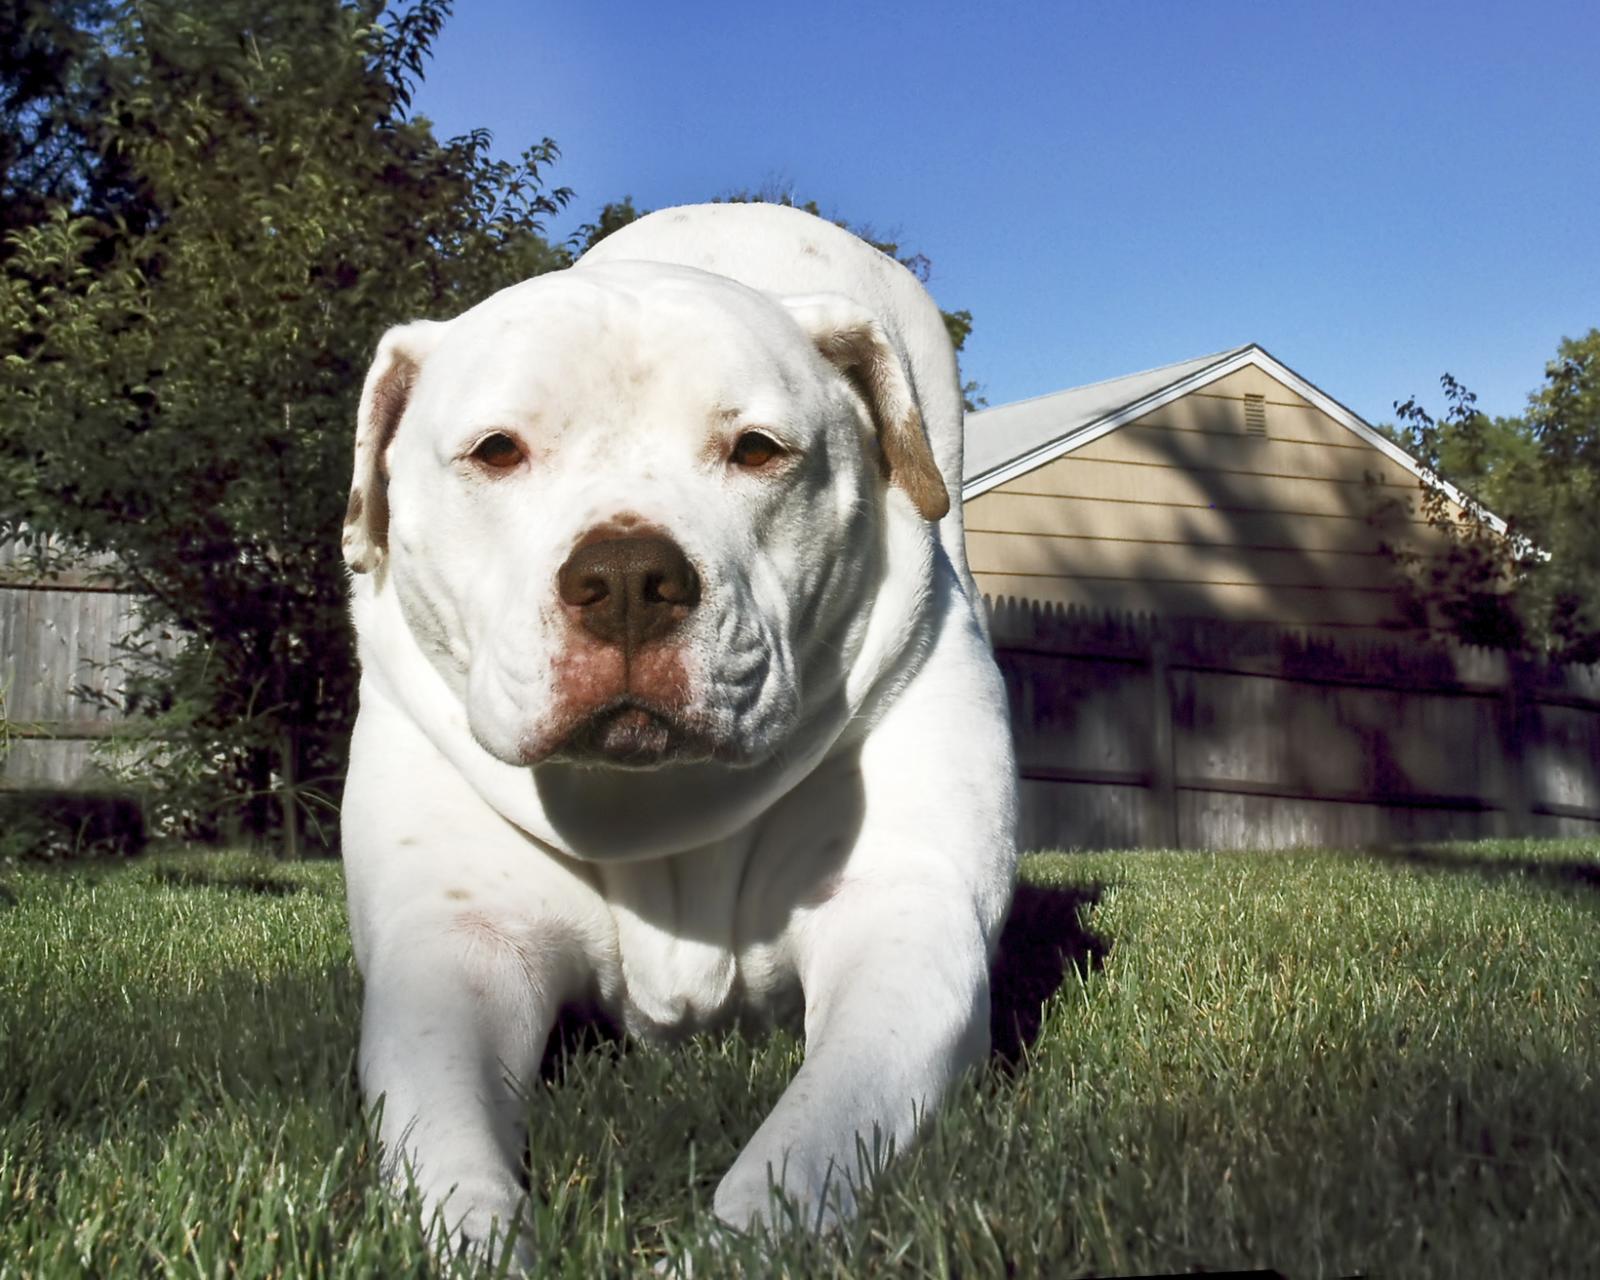 What You Need to Know About American Bulldog Health